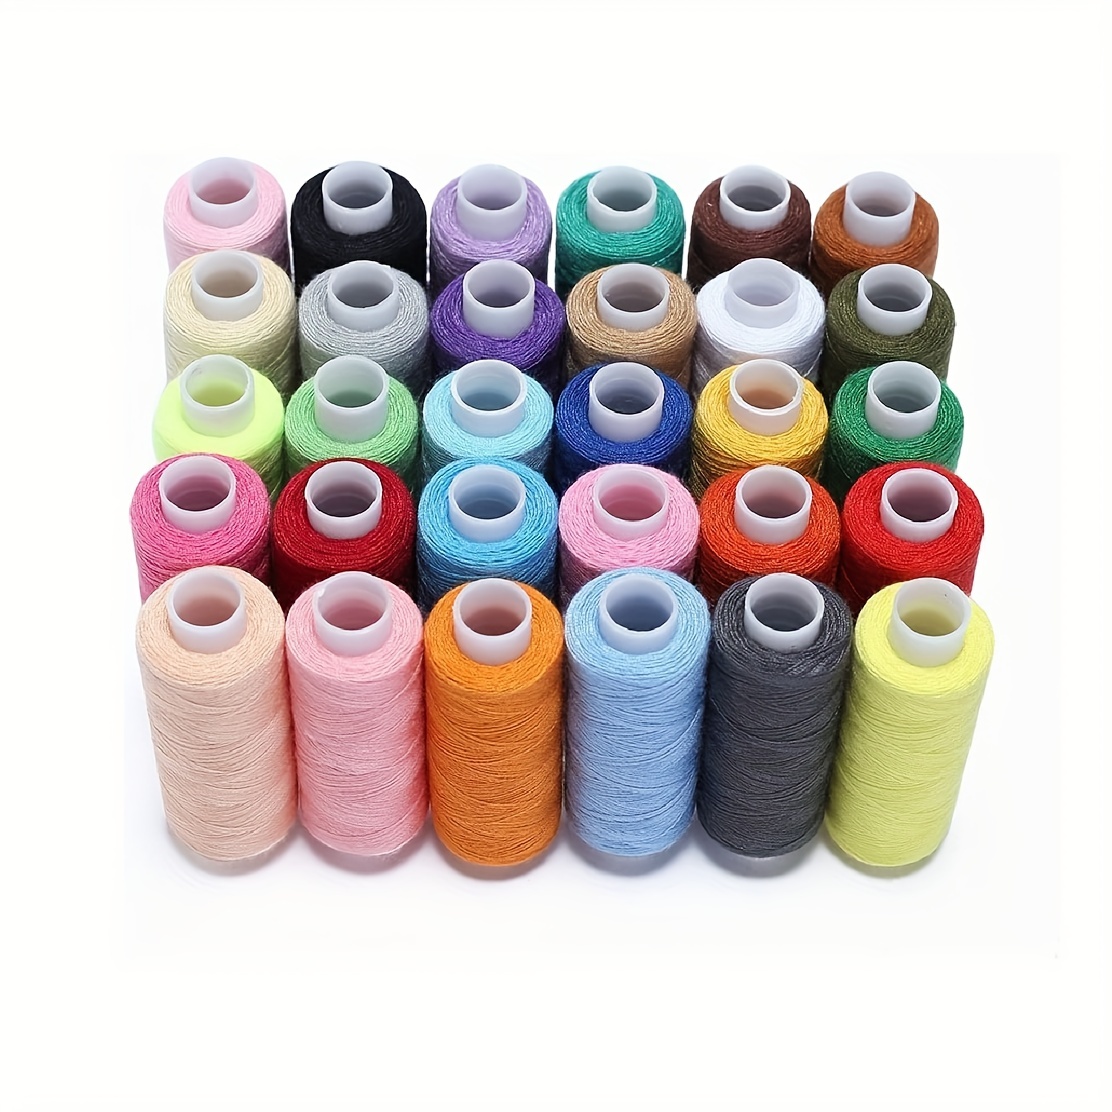 Sewing Thread Kit Includes 36 Colors Polyester Sewing Thread 400 Yards Each  Spool For Hand Sewing, Quilting And Sewing Machine Use